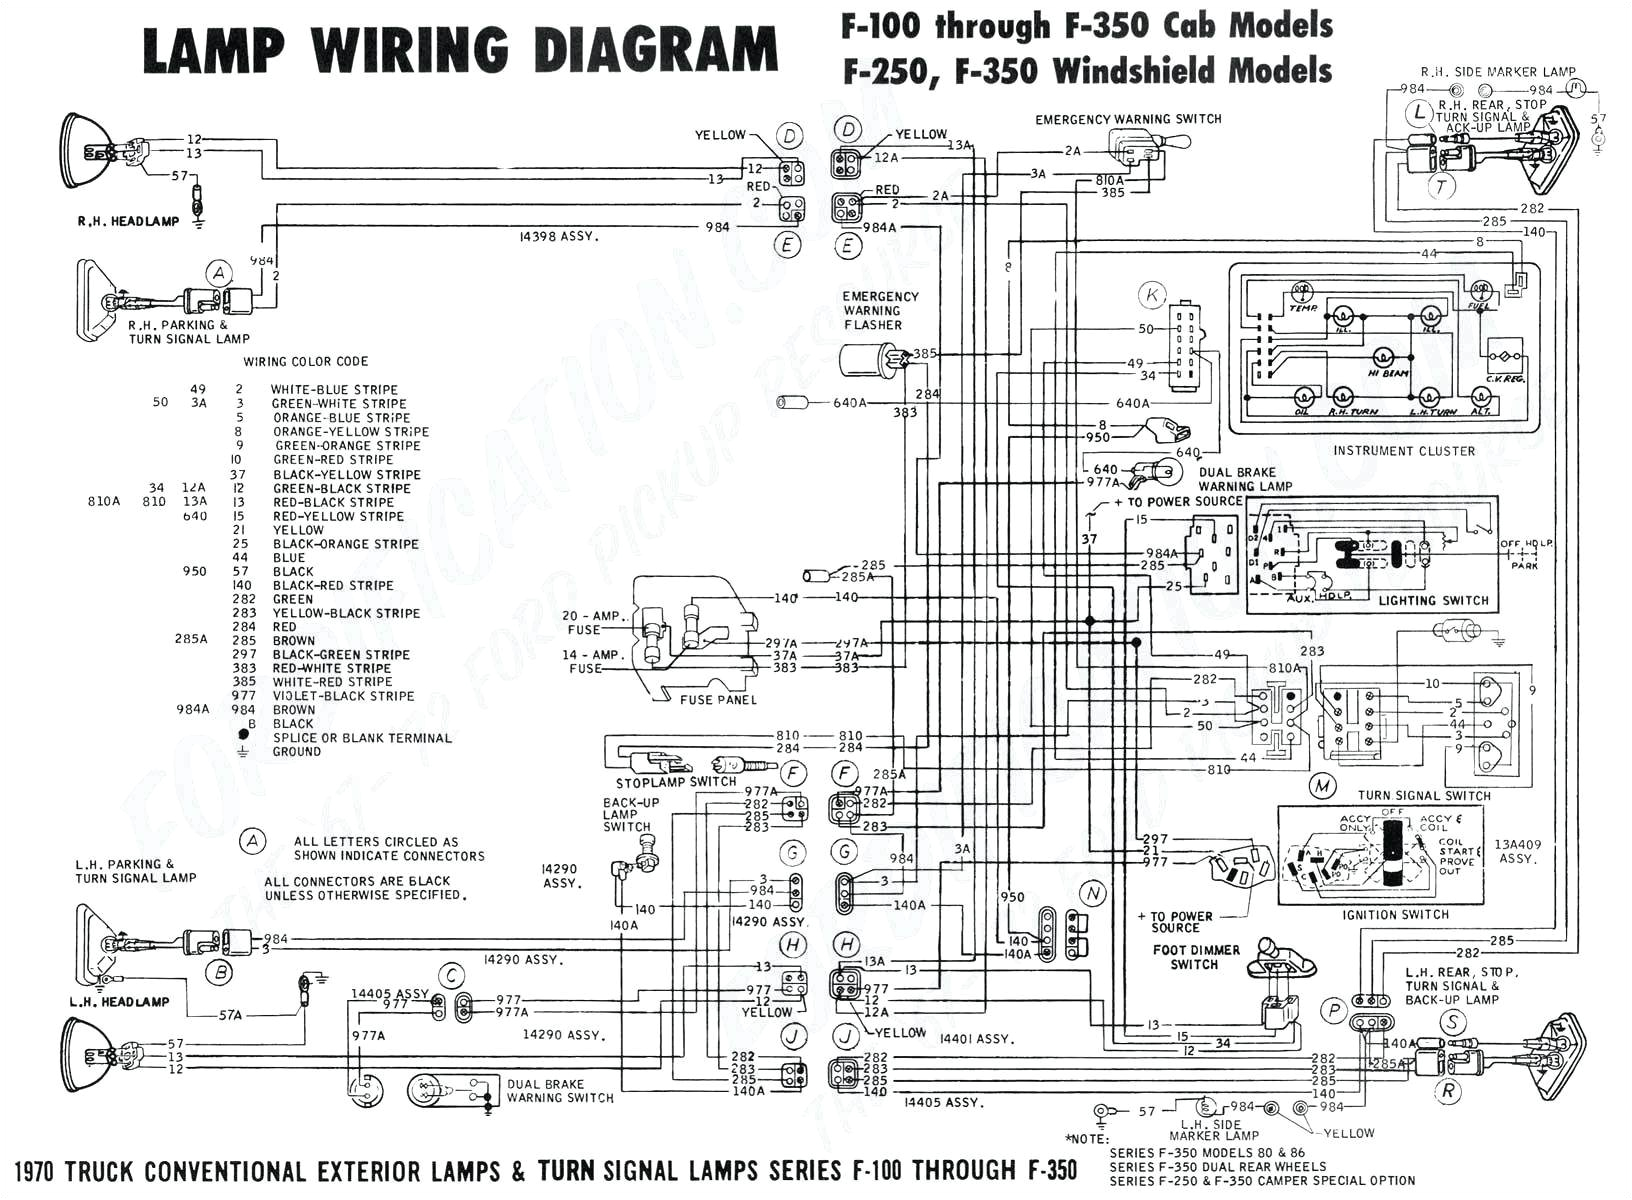 2003 ford f350 trailer wiring harness wiring diagram blog ford truck f250 trailer wiring harness diagram